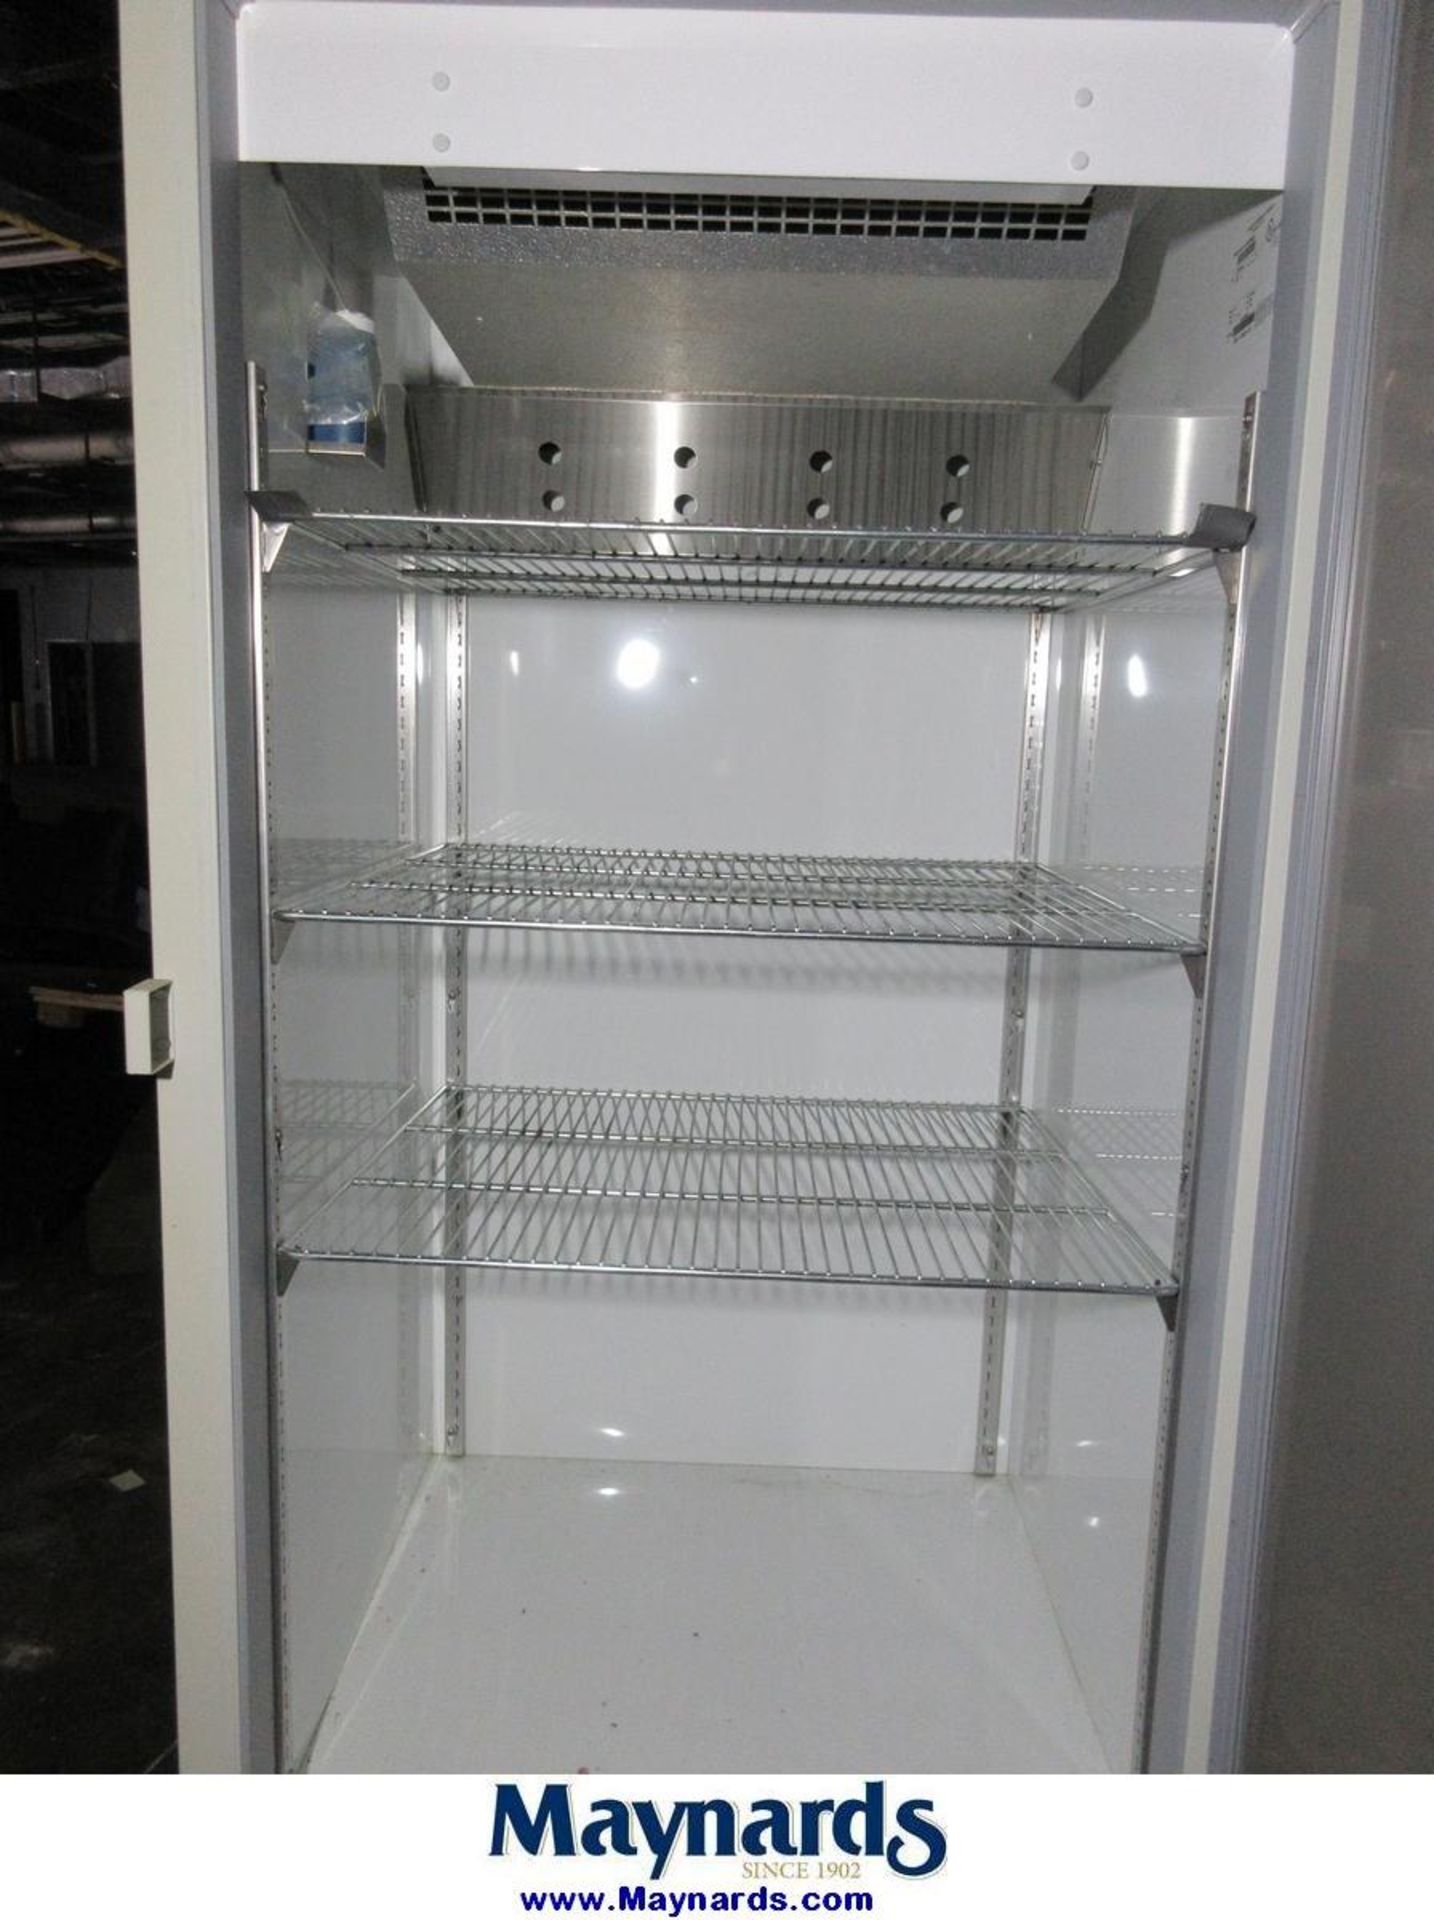 Kendro Laboratory Products REL3004A20 Lab Refrigerator - Image 4 of 8